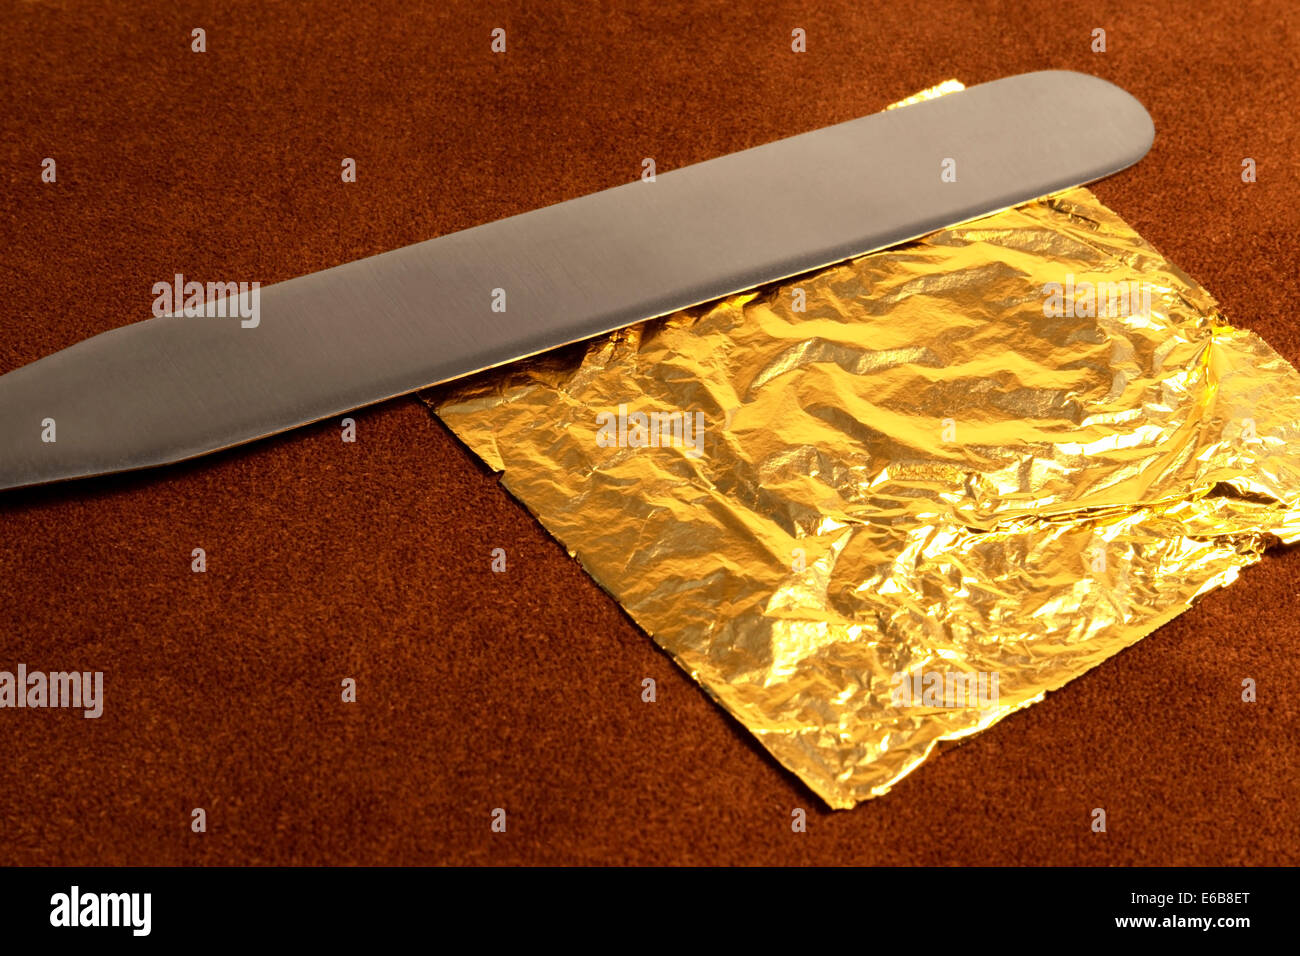 gilding theme with a leaf of beaten gold and blade on brown leather surface in warm ambiance Stock Photo